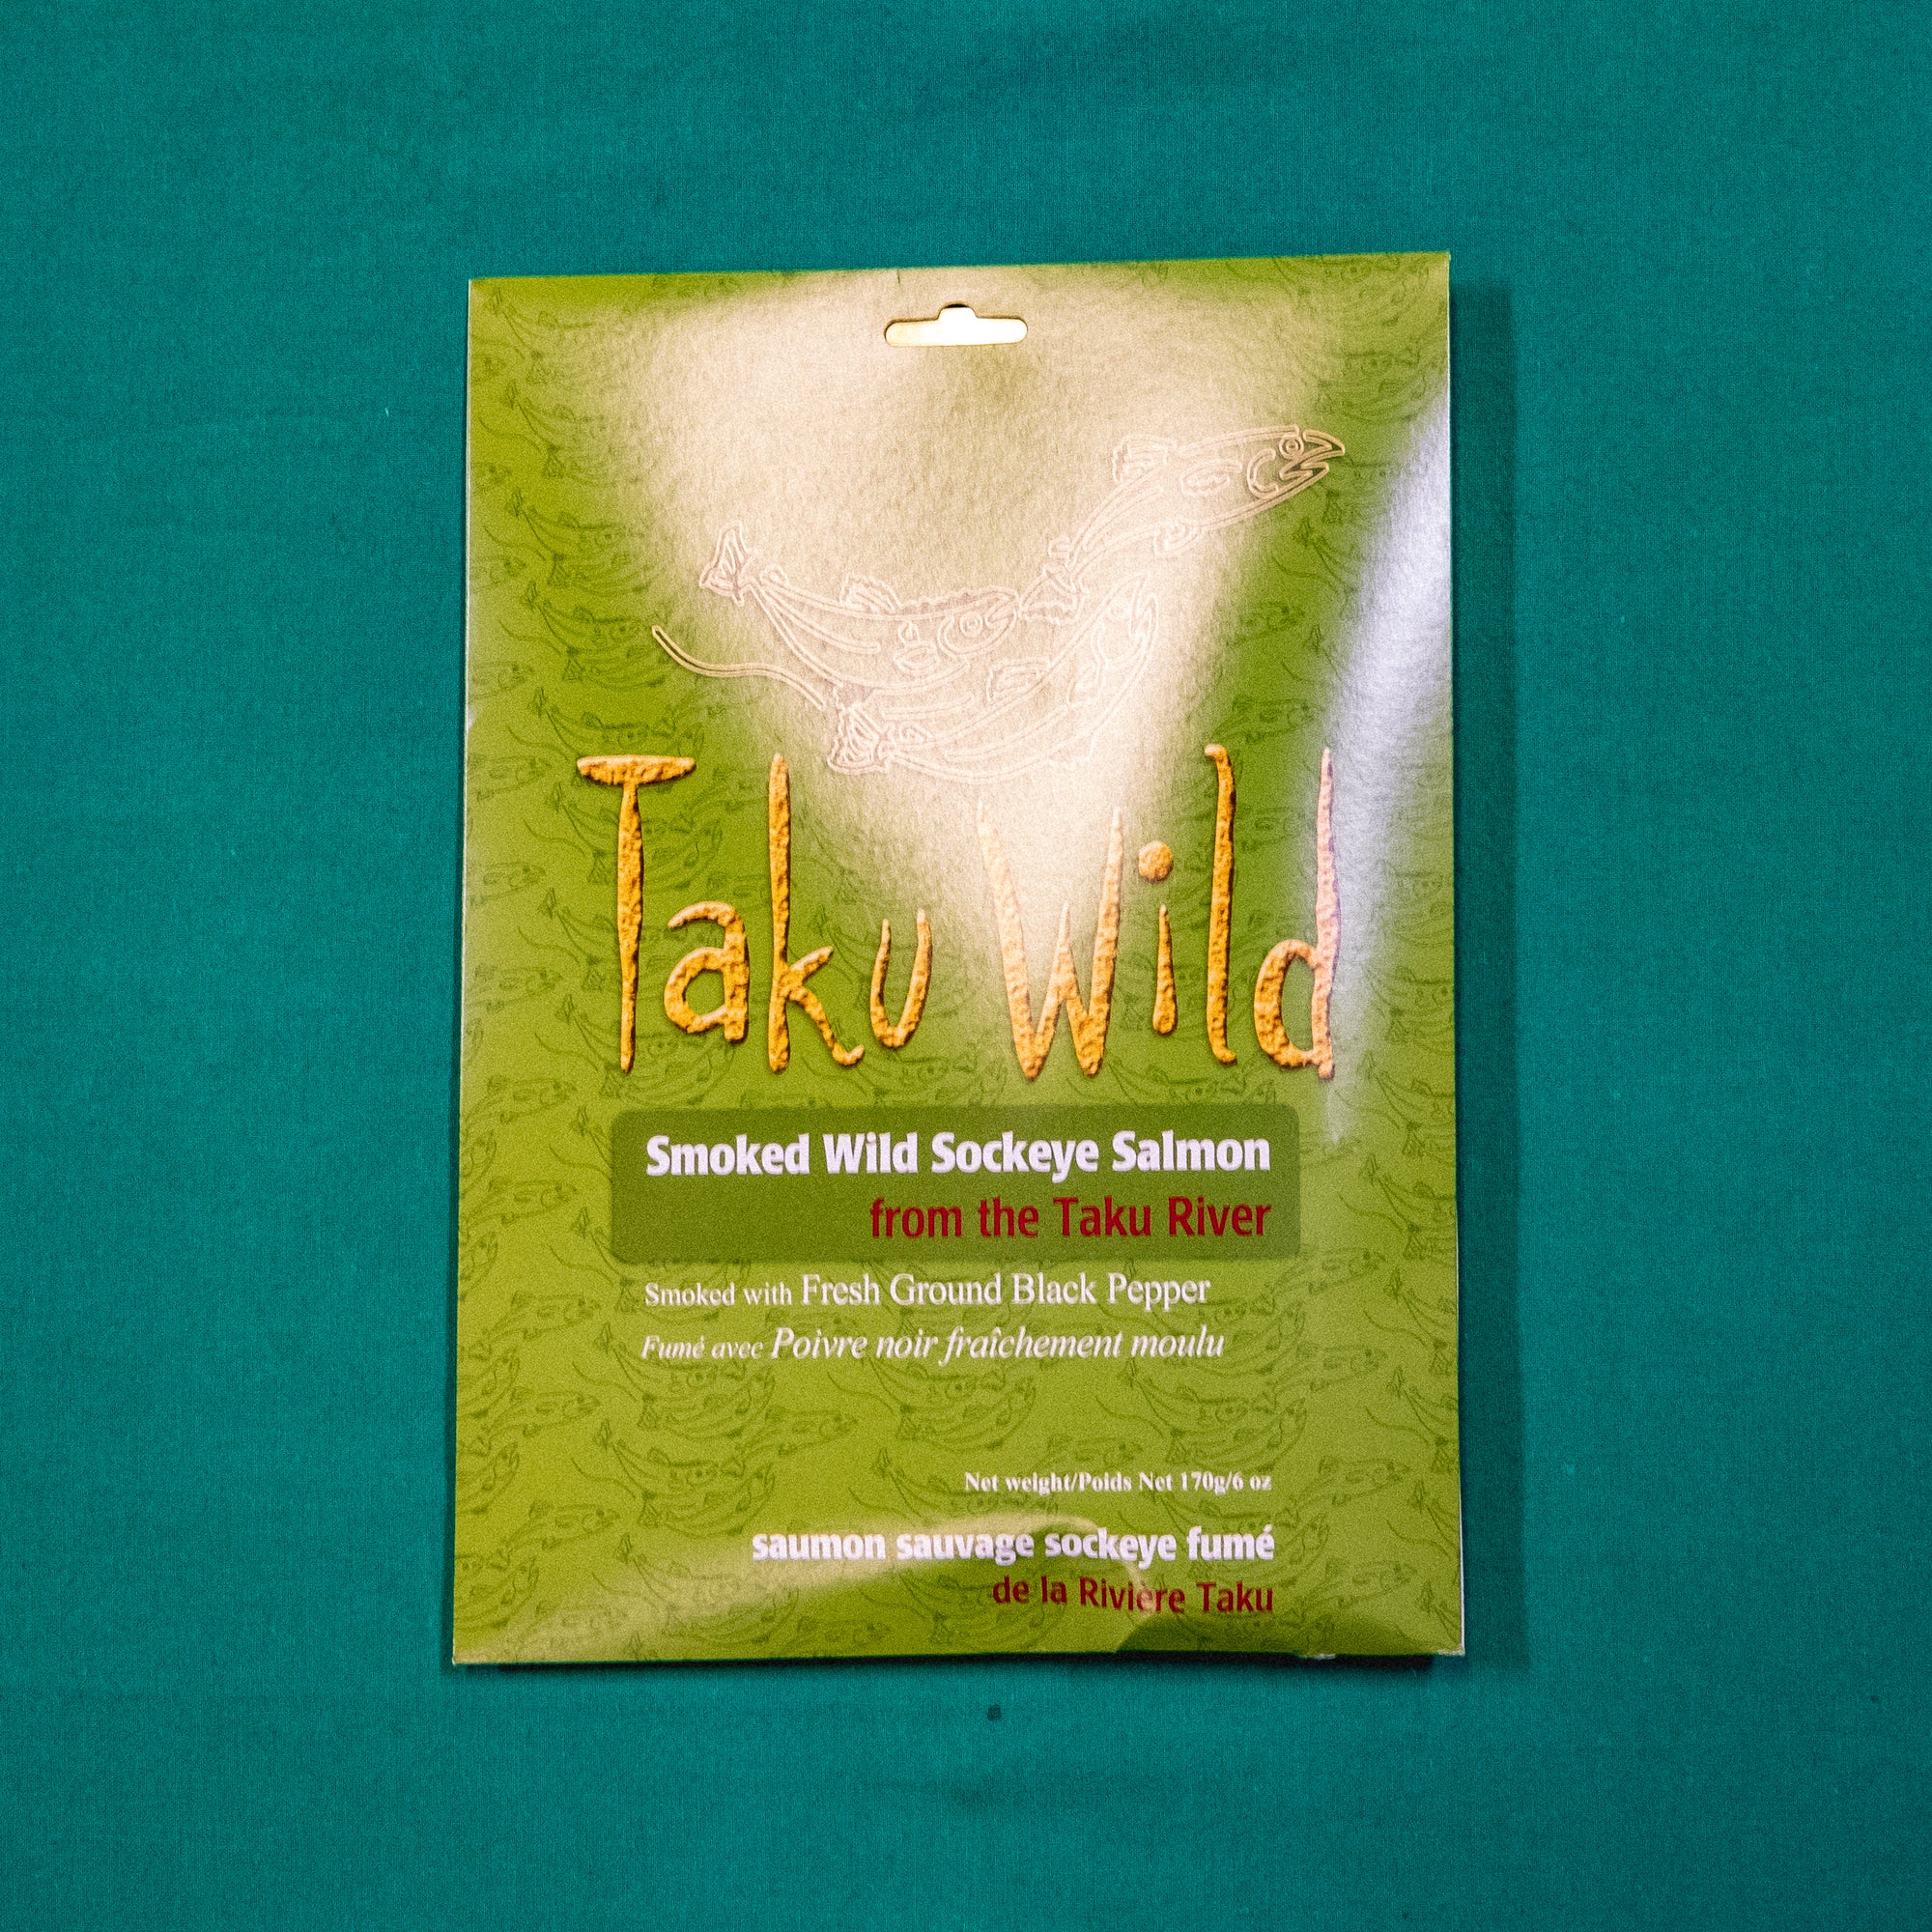 A packet with illustrations of salmon. Text on the image says "Taku Wild. Smoked Wild Sockeye Salmon from the Taku River. Smoked with Fresh Ground Black Pepper." End of image description.